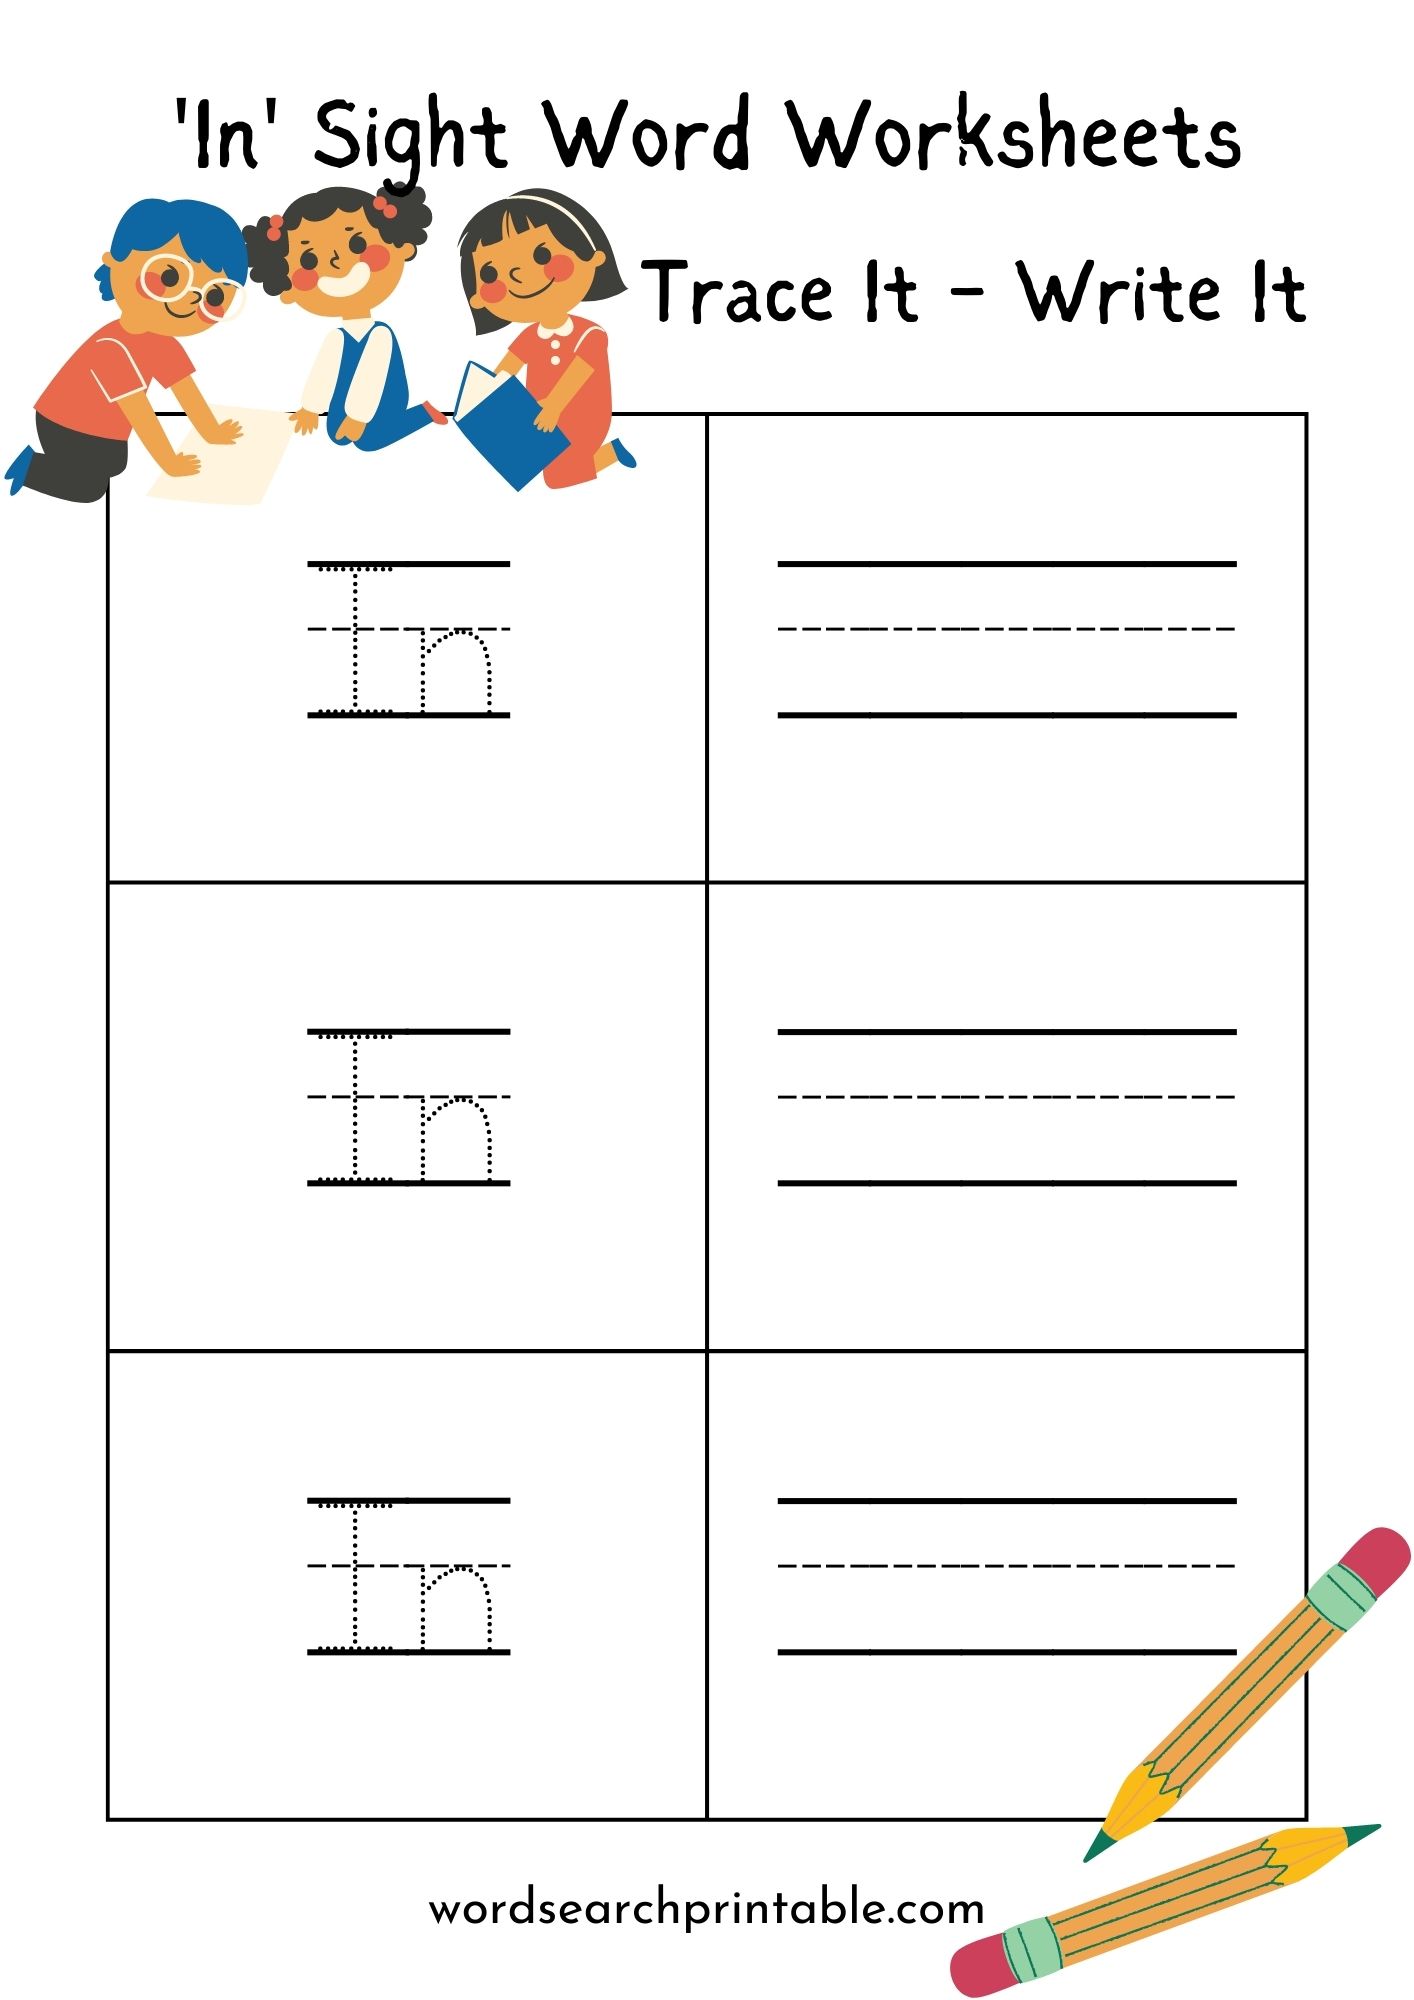 Sight word In Trace It Worksheet